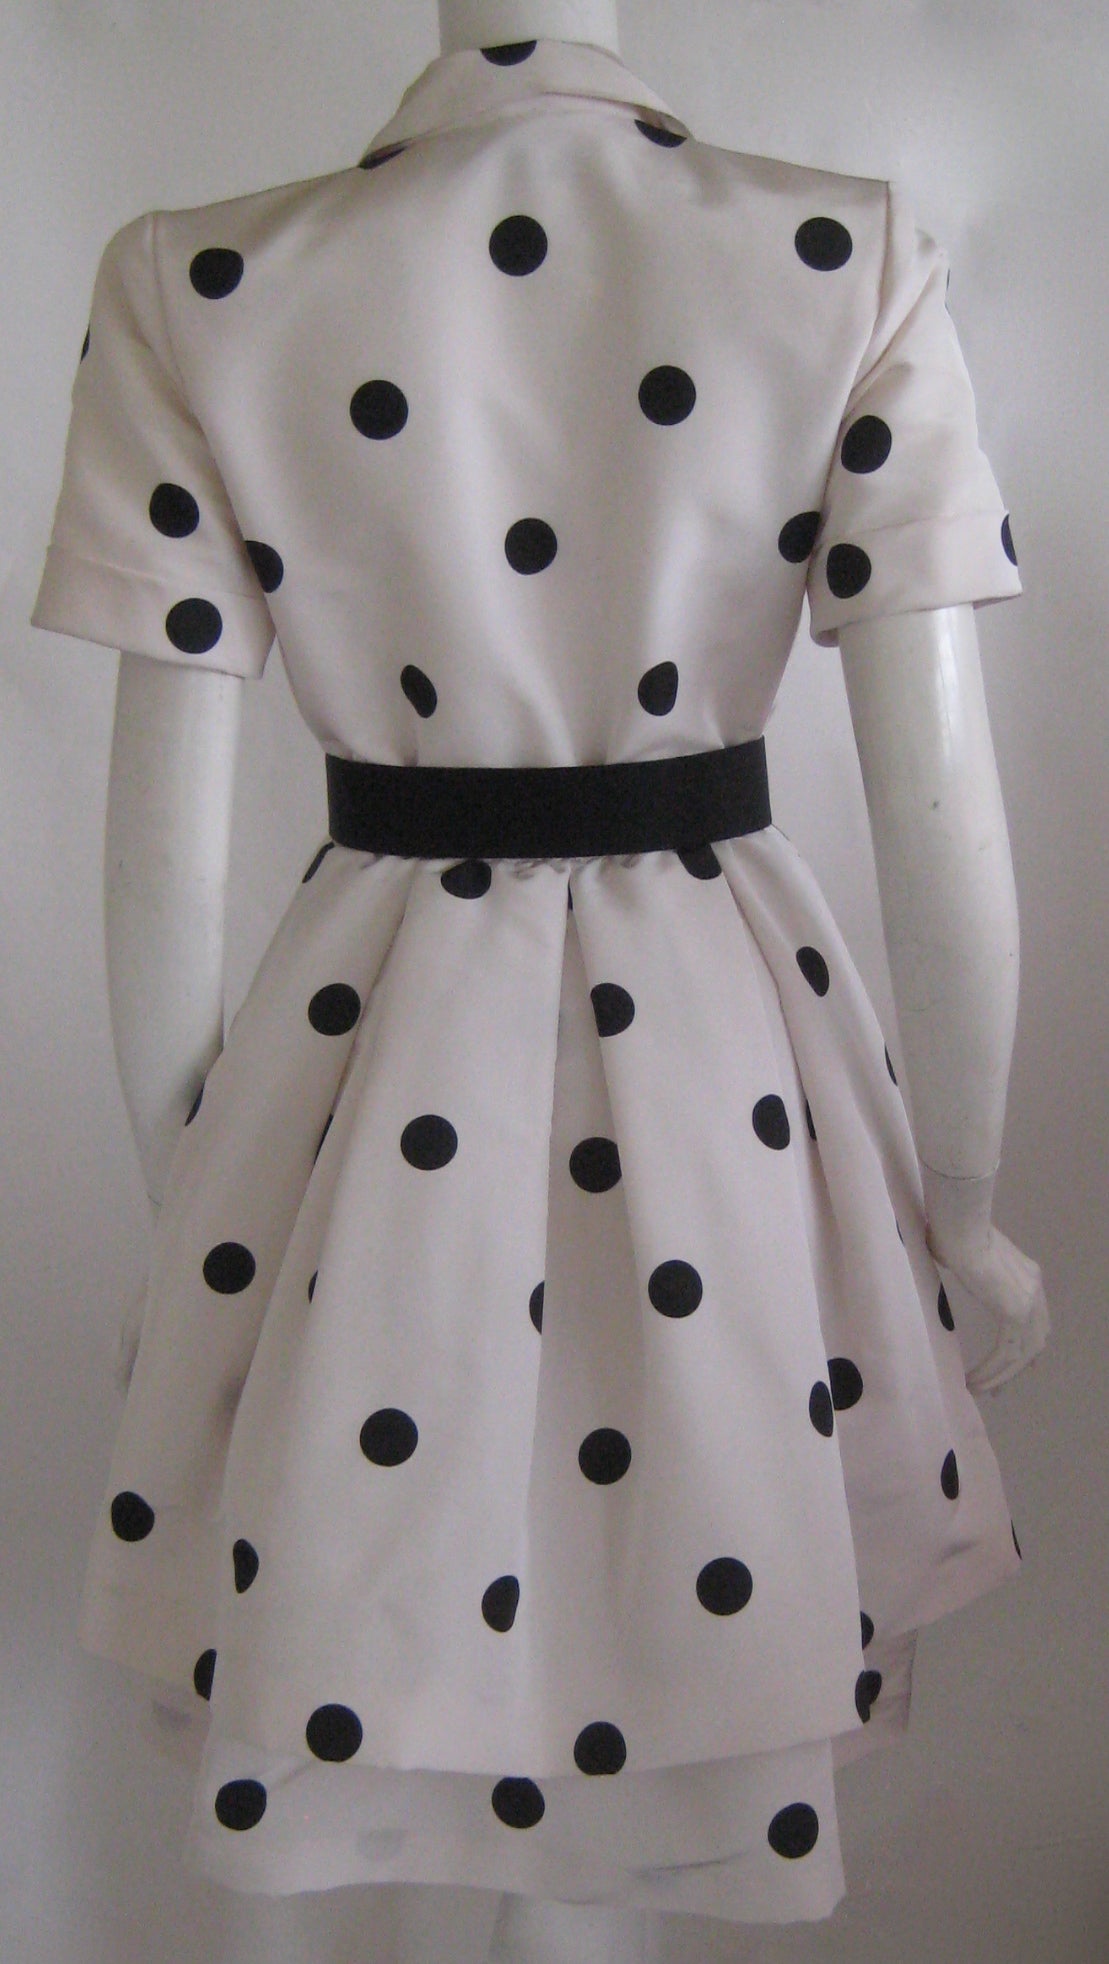 Wonderful 1980s cocktail party dress in silk taffeta with an attached silk organza crinoline that is edged in the same polka dot taffeta as the dress.This dress has small shoulder pads and a matching black silk belt.It snaps up the front and it has